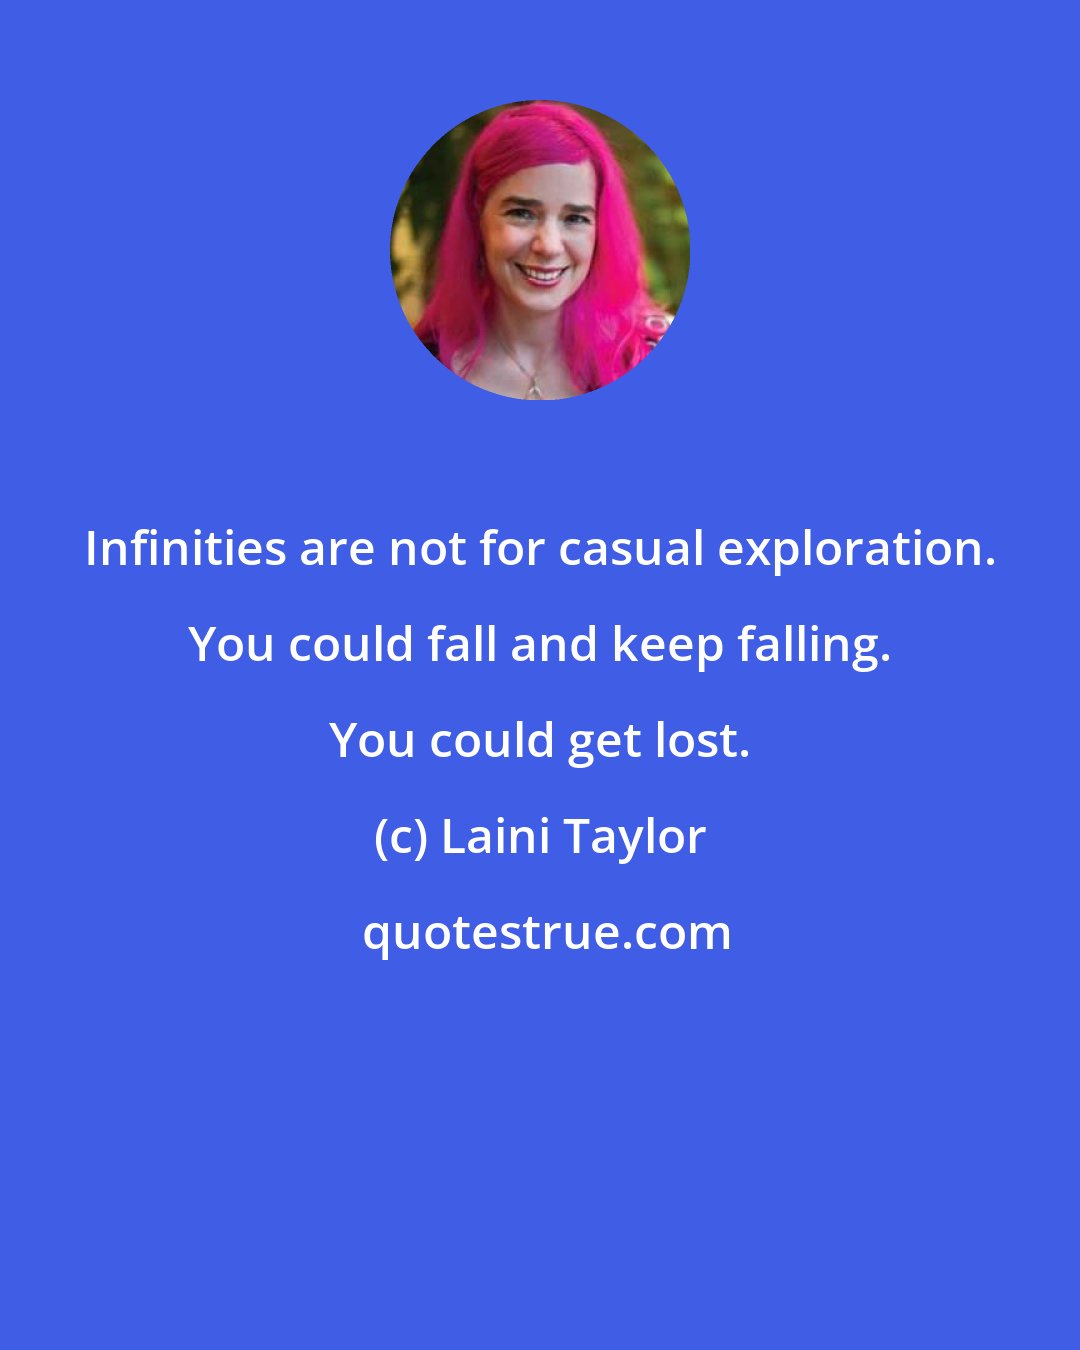 Laini Taylor: Infinities are not for casual exploration. You could fall and keep falling. You could get lost.